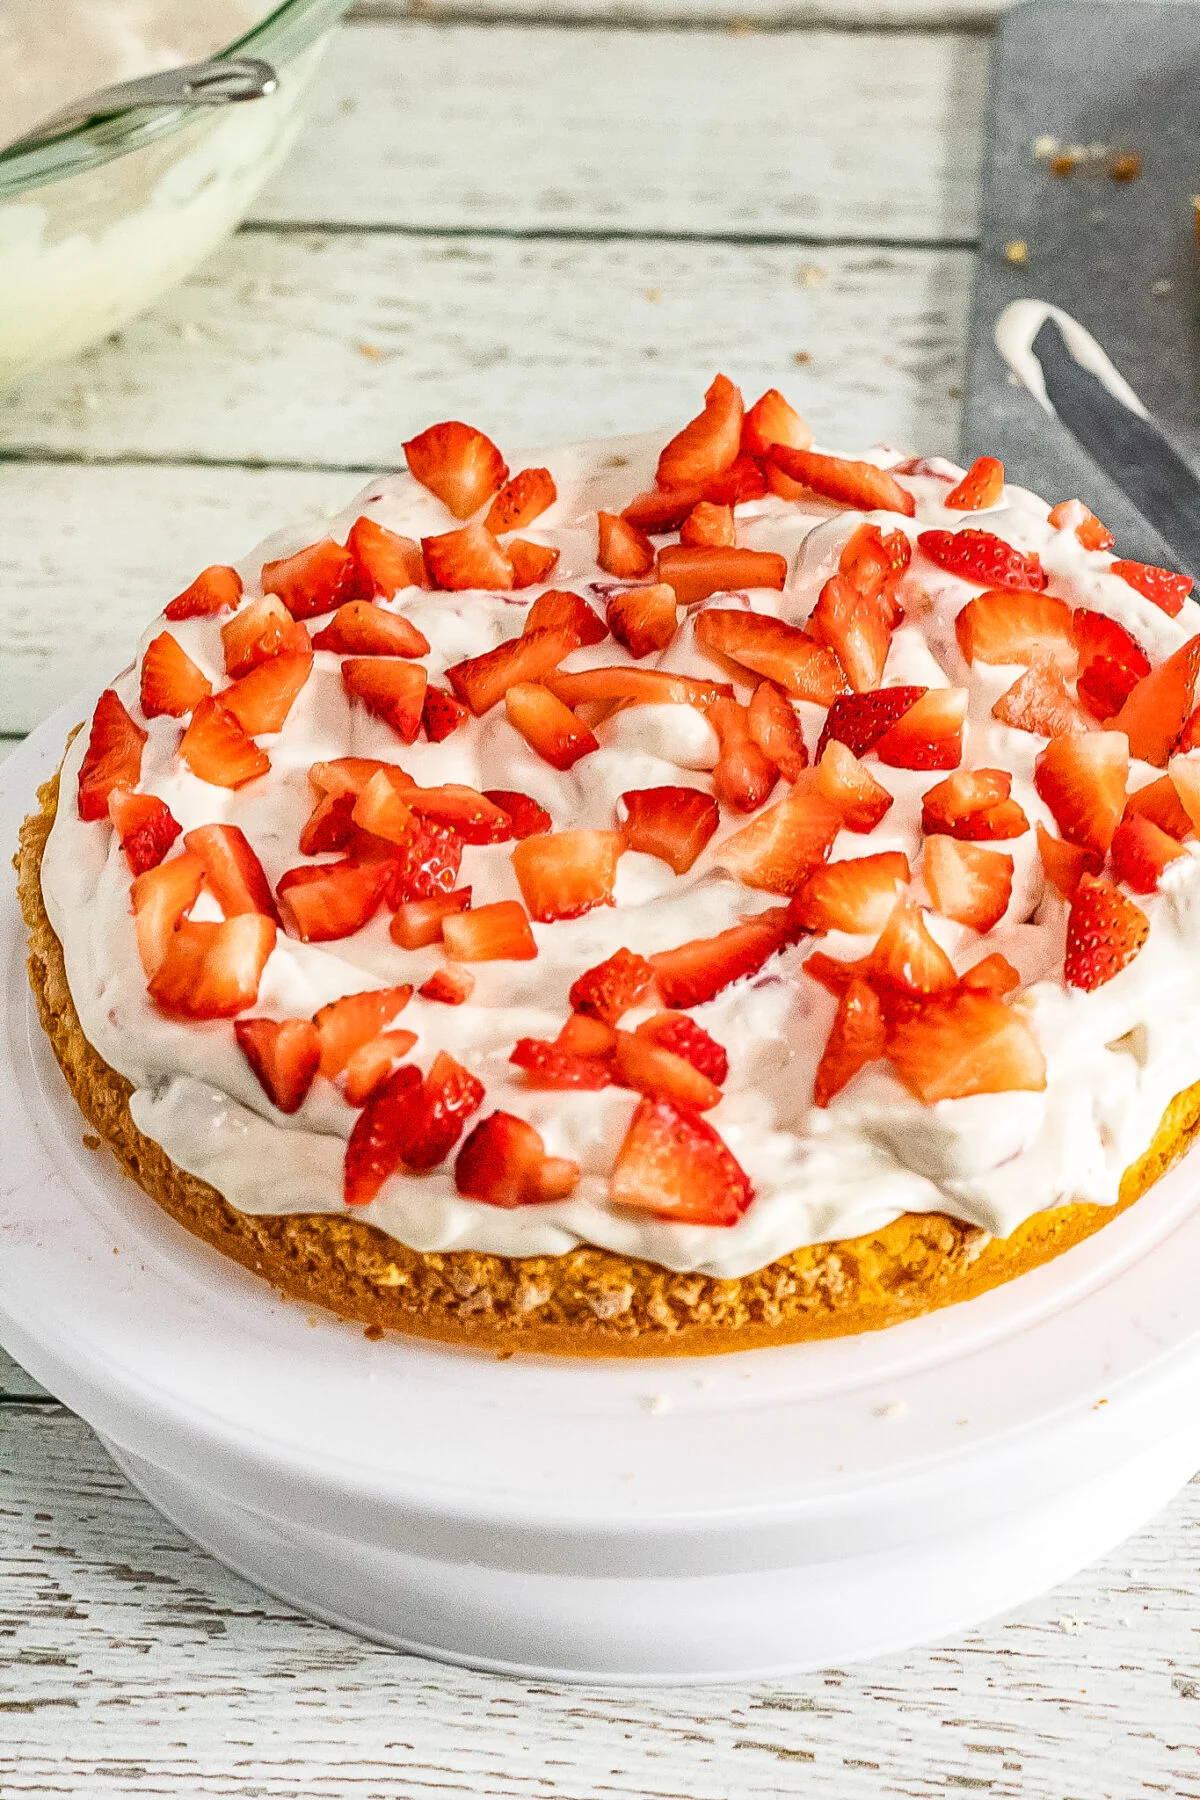 Cake topped with whipping cream and strawberries